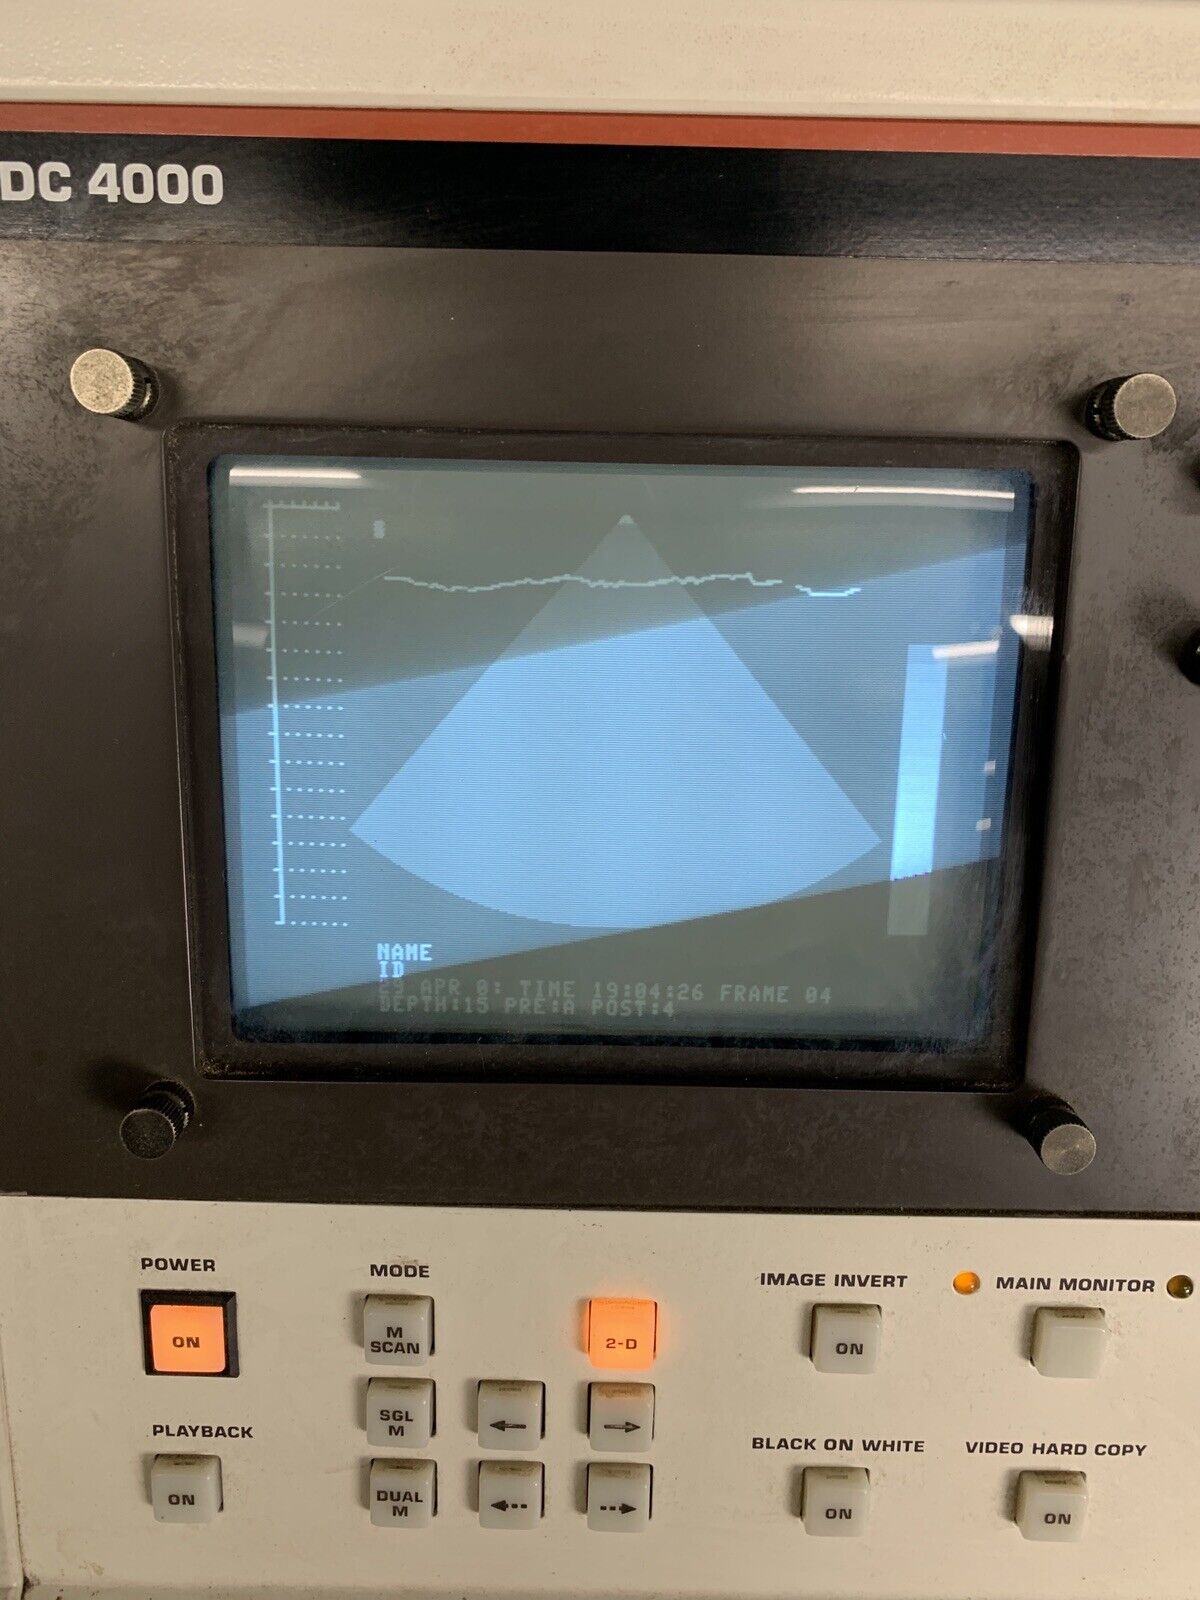 Philips SDC 4000 Ultrasound Machine Power Tested